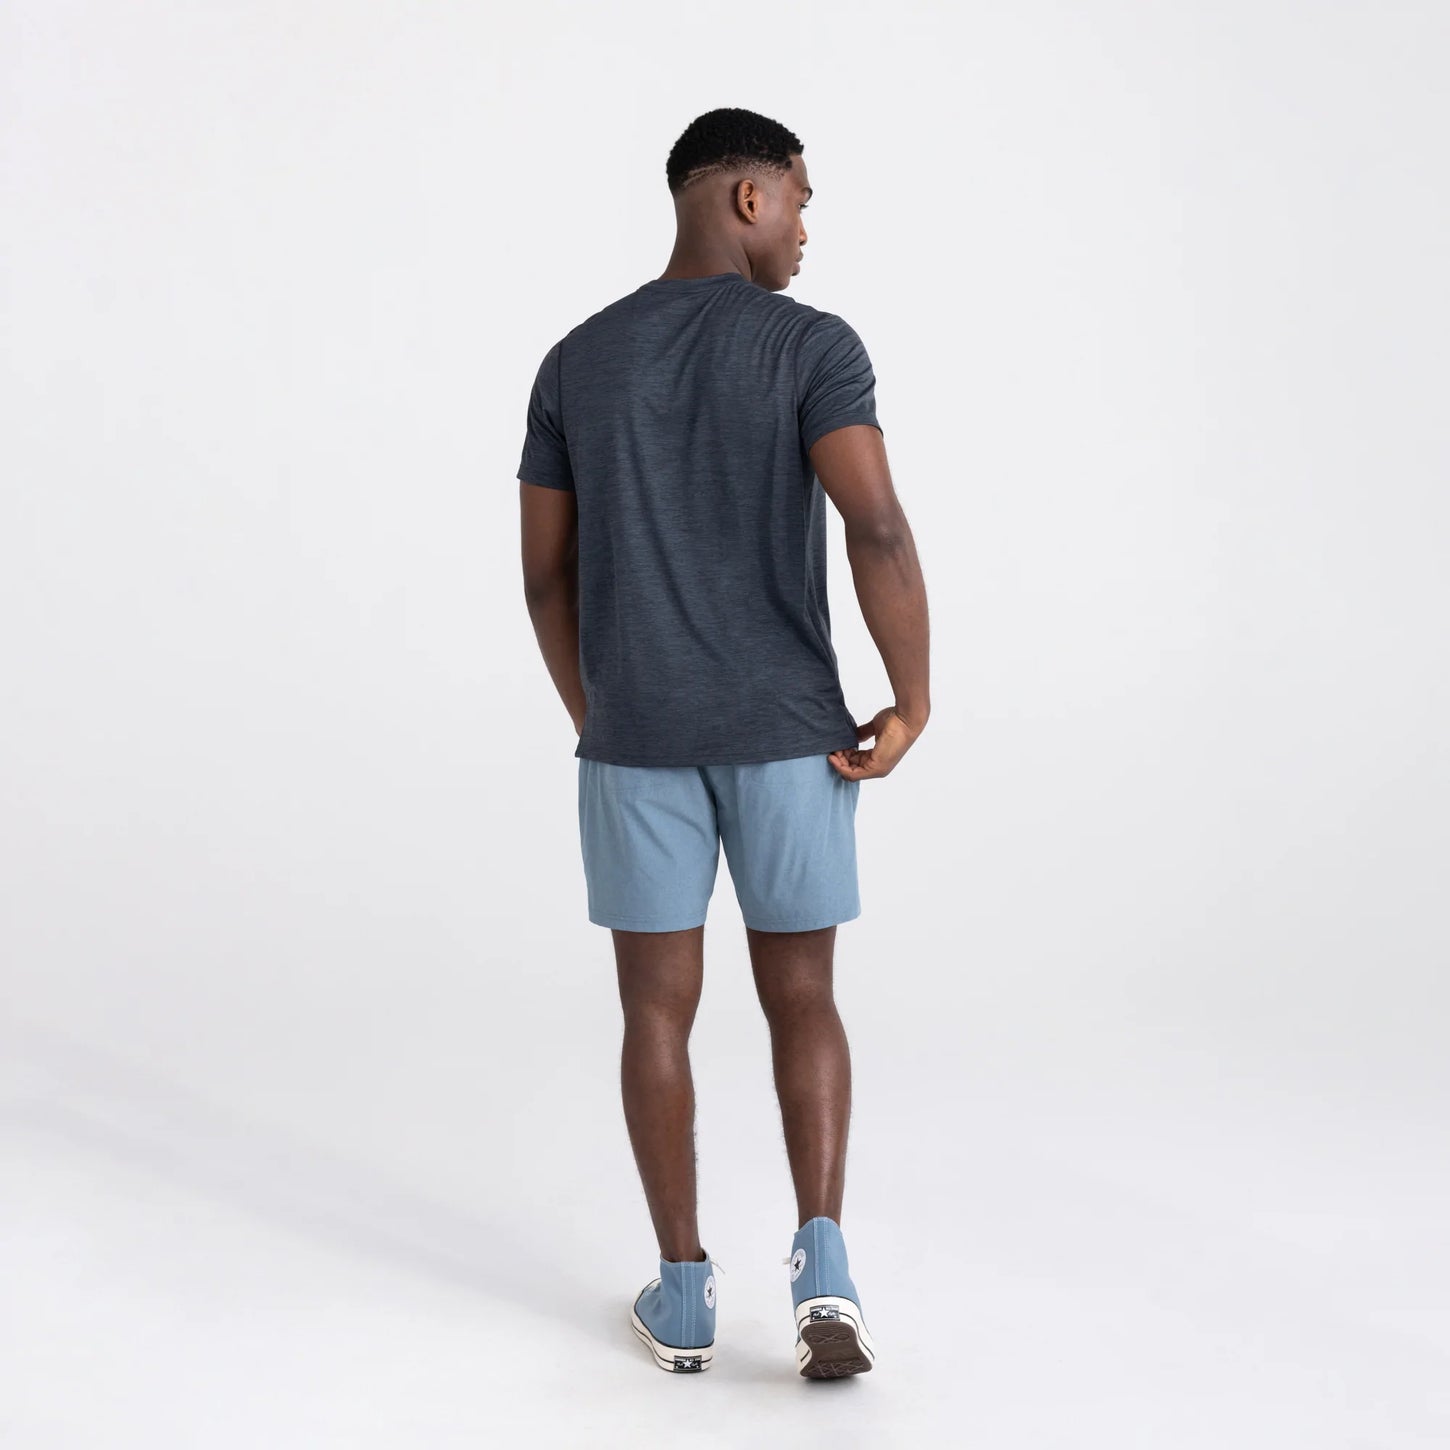 Saxx 7” Sport 2 Life 2 in 1 Short - Stone Blue Heather Mens - Other Mens - Bottoms by Saxx | Grace the Boutique